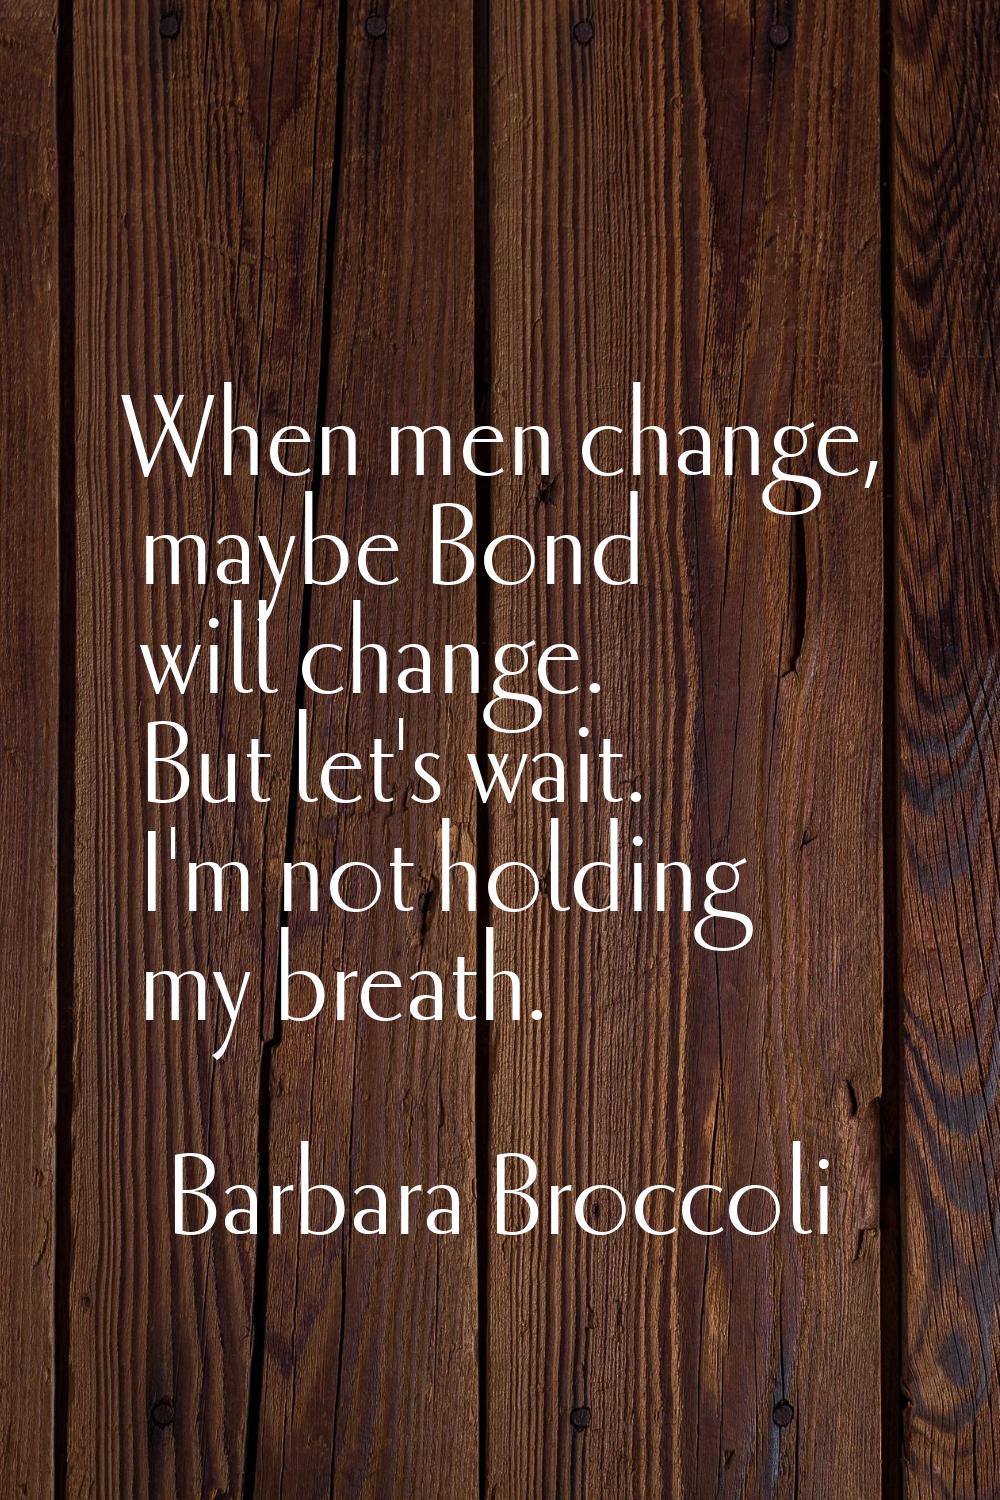 When men change, maybe Bond will change. But let's wait. I'm not holding my breath.